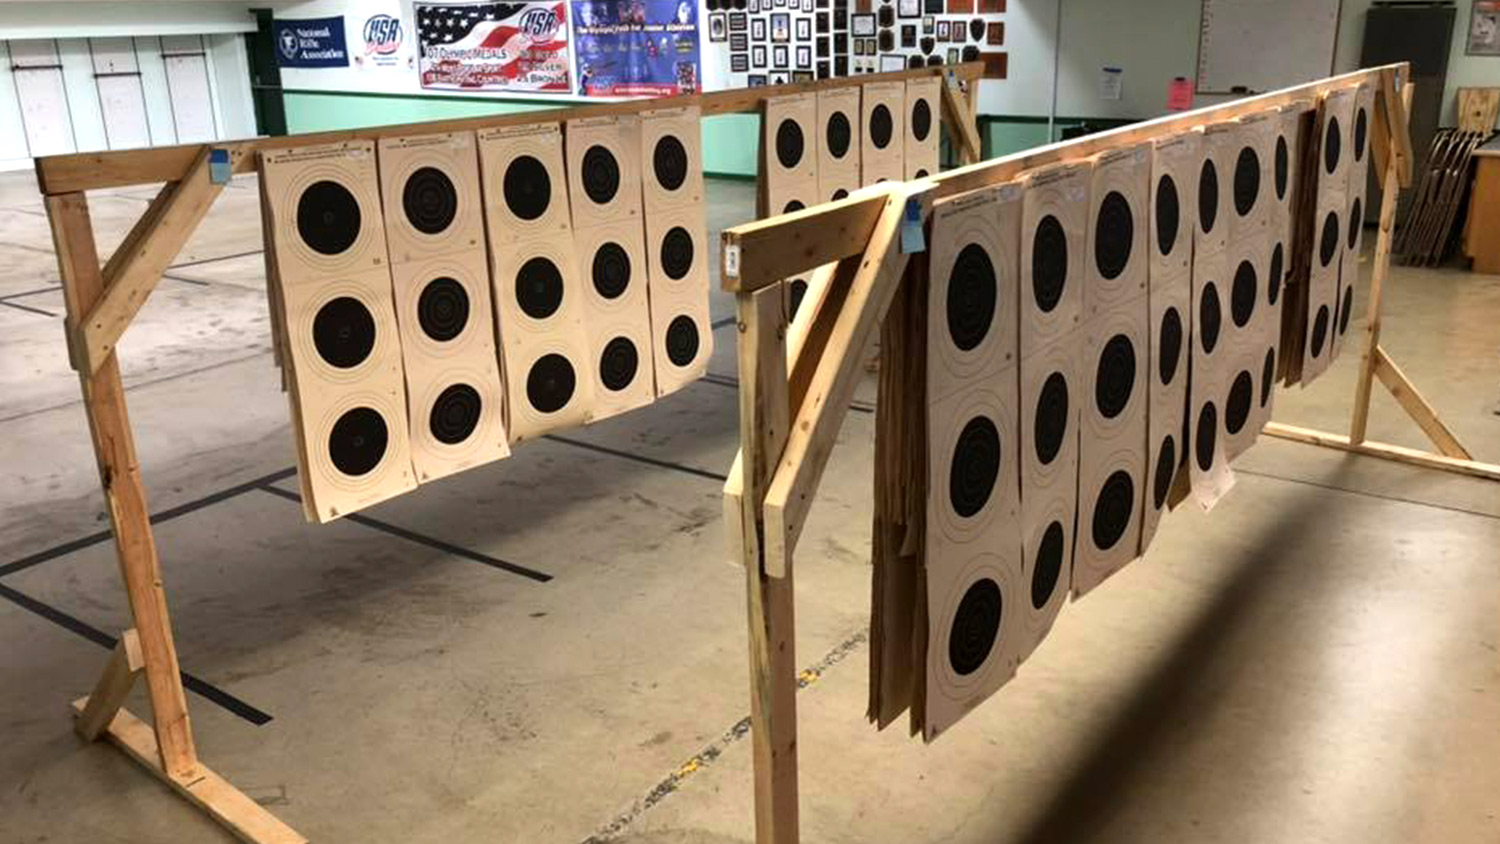 Scored conventional prone smallbore rifle targets